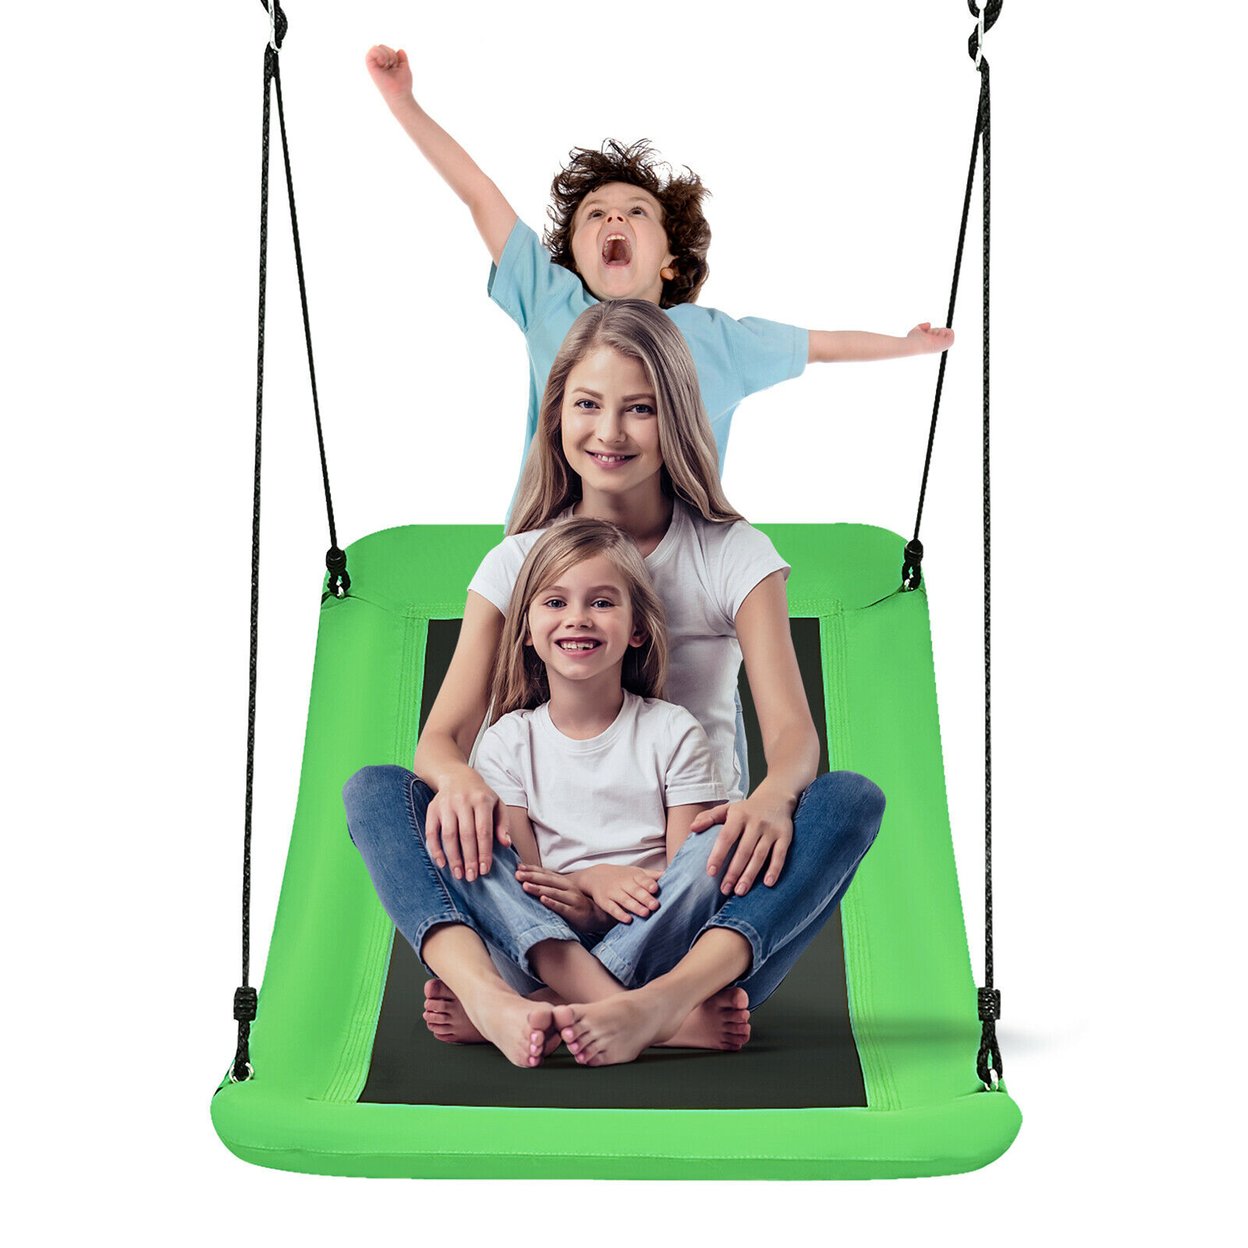 700lb Giant 60'' Platform Tree Swing For Kids And Adults - Green